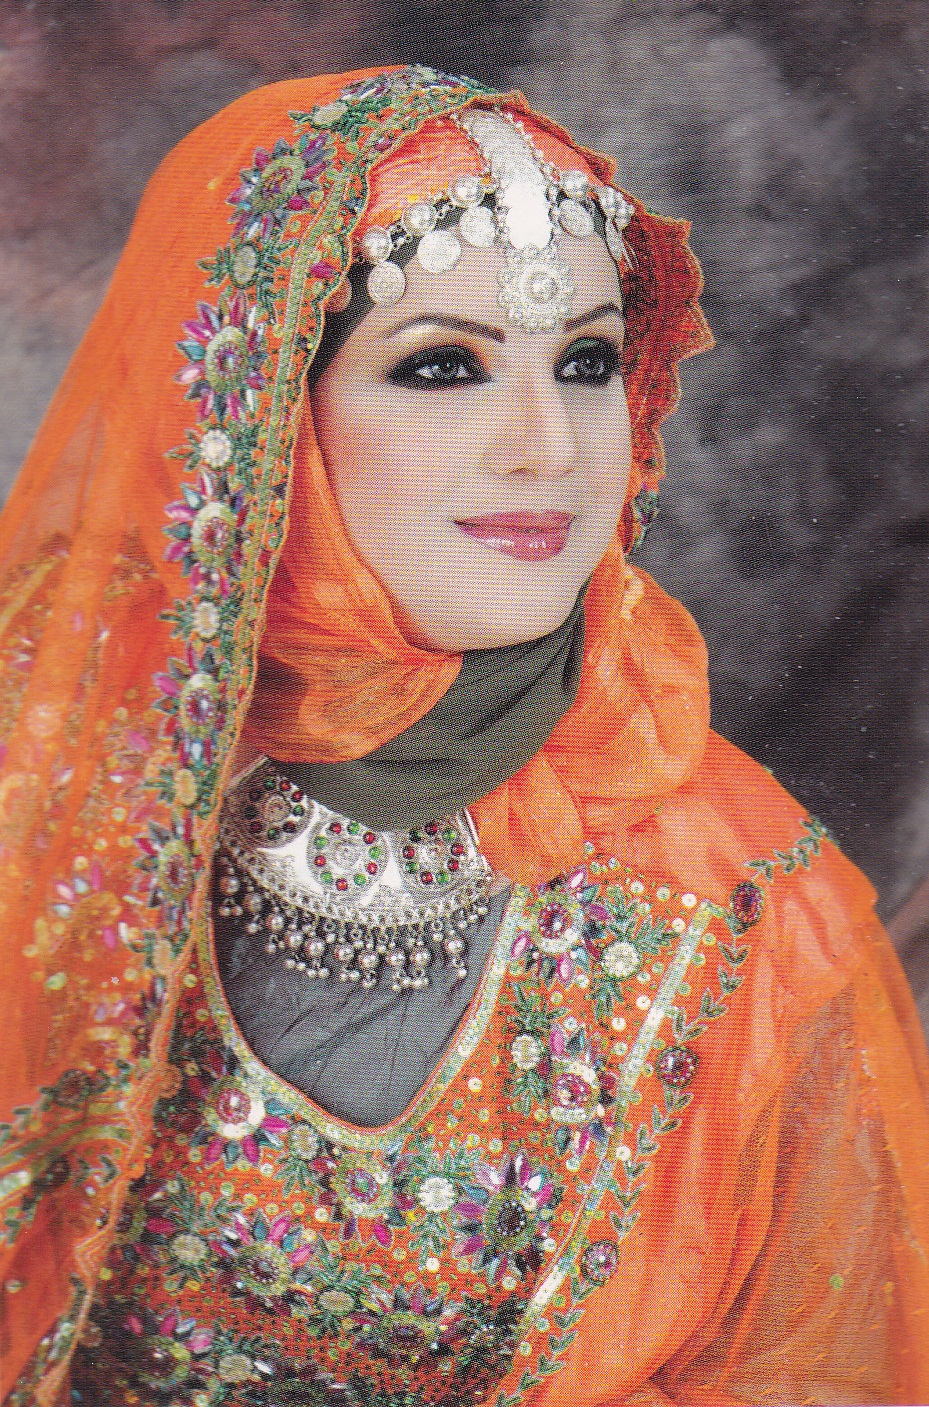 Some scans of Omani Women's Regional Dress from a couple of Magazines